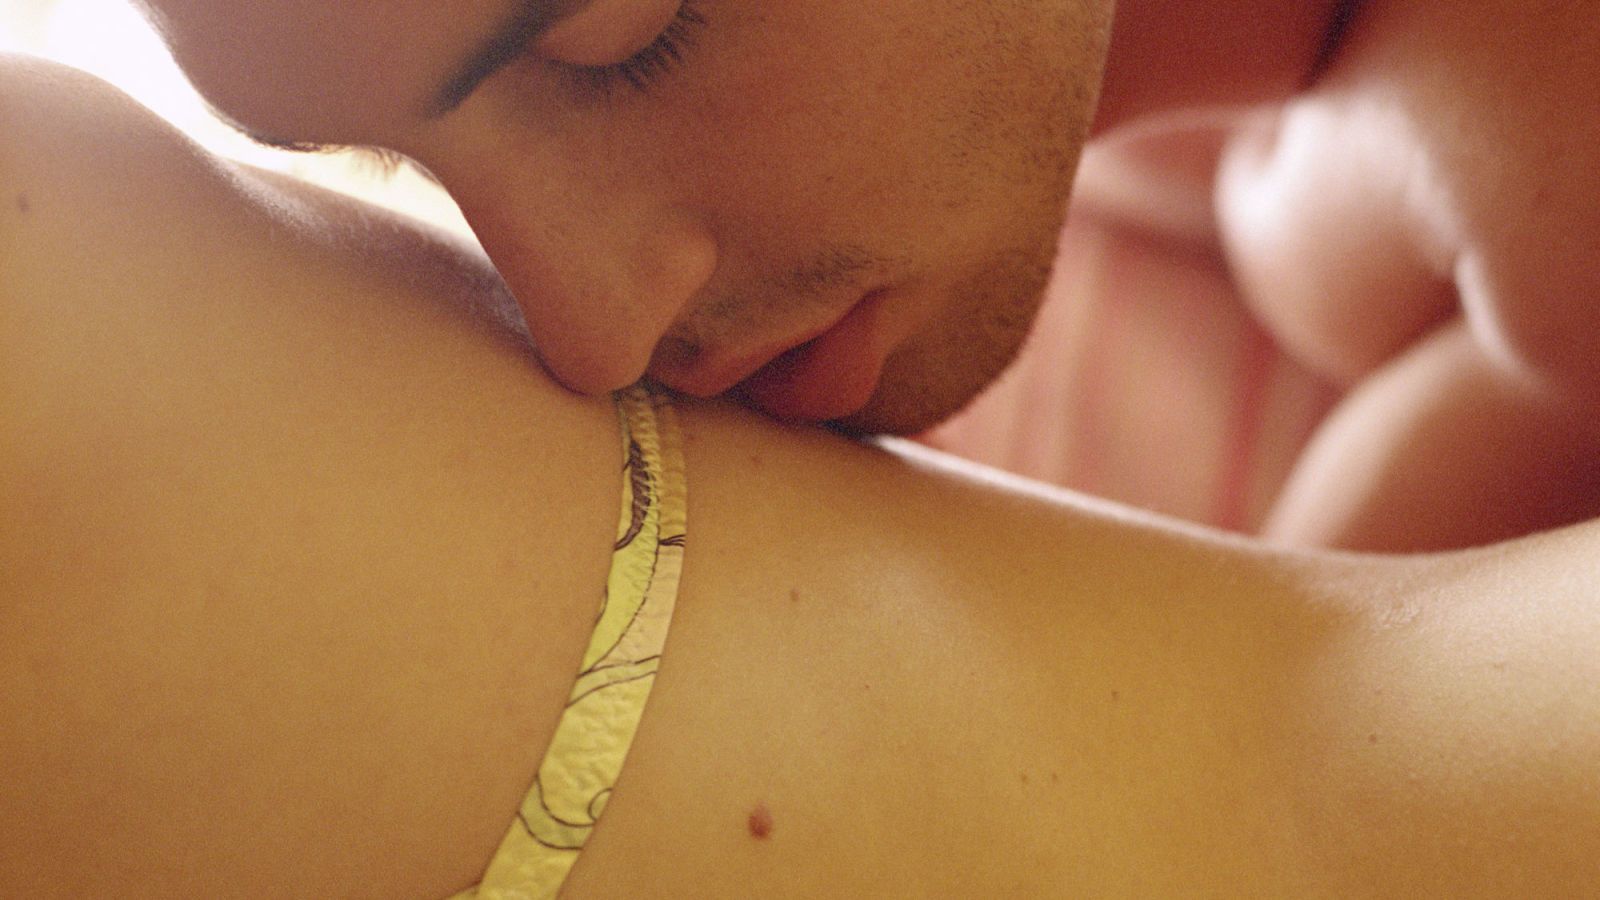 27 Guys Reveal The Best Thing a Woman Has Ever Done In